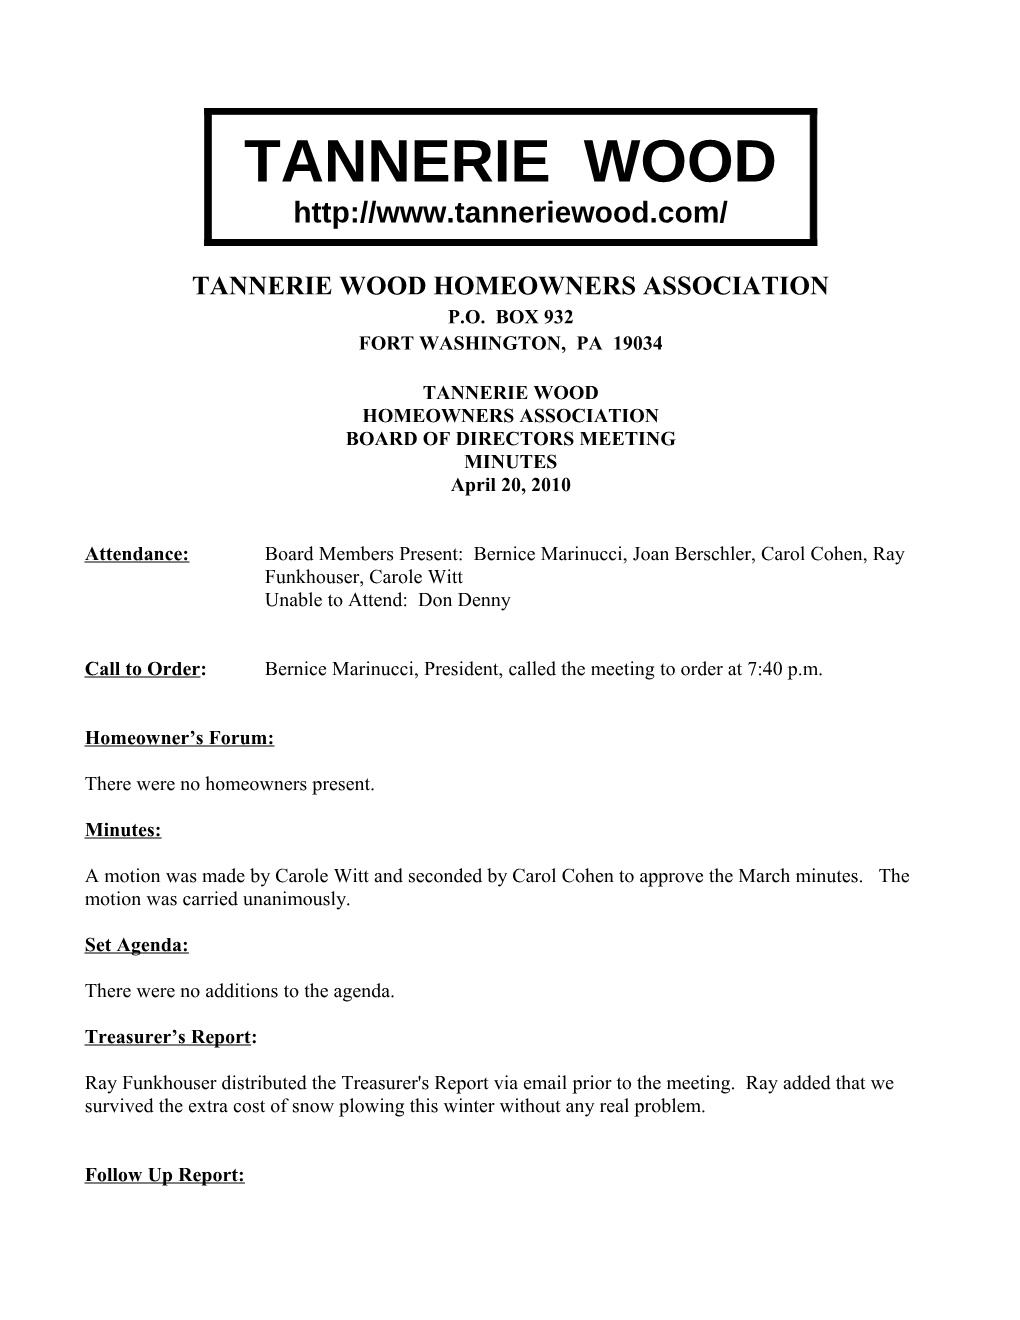 Tannerie Wood Homeowners Association s2